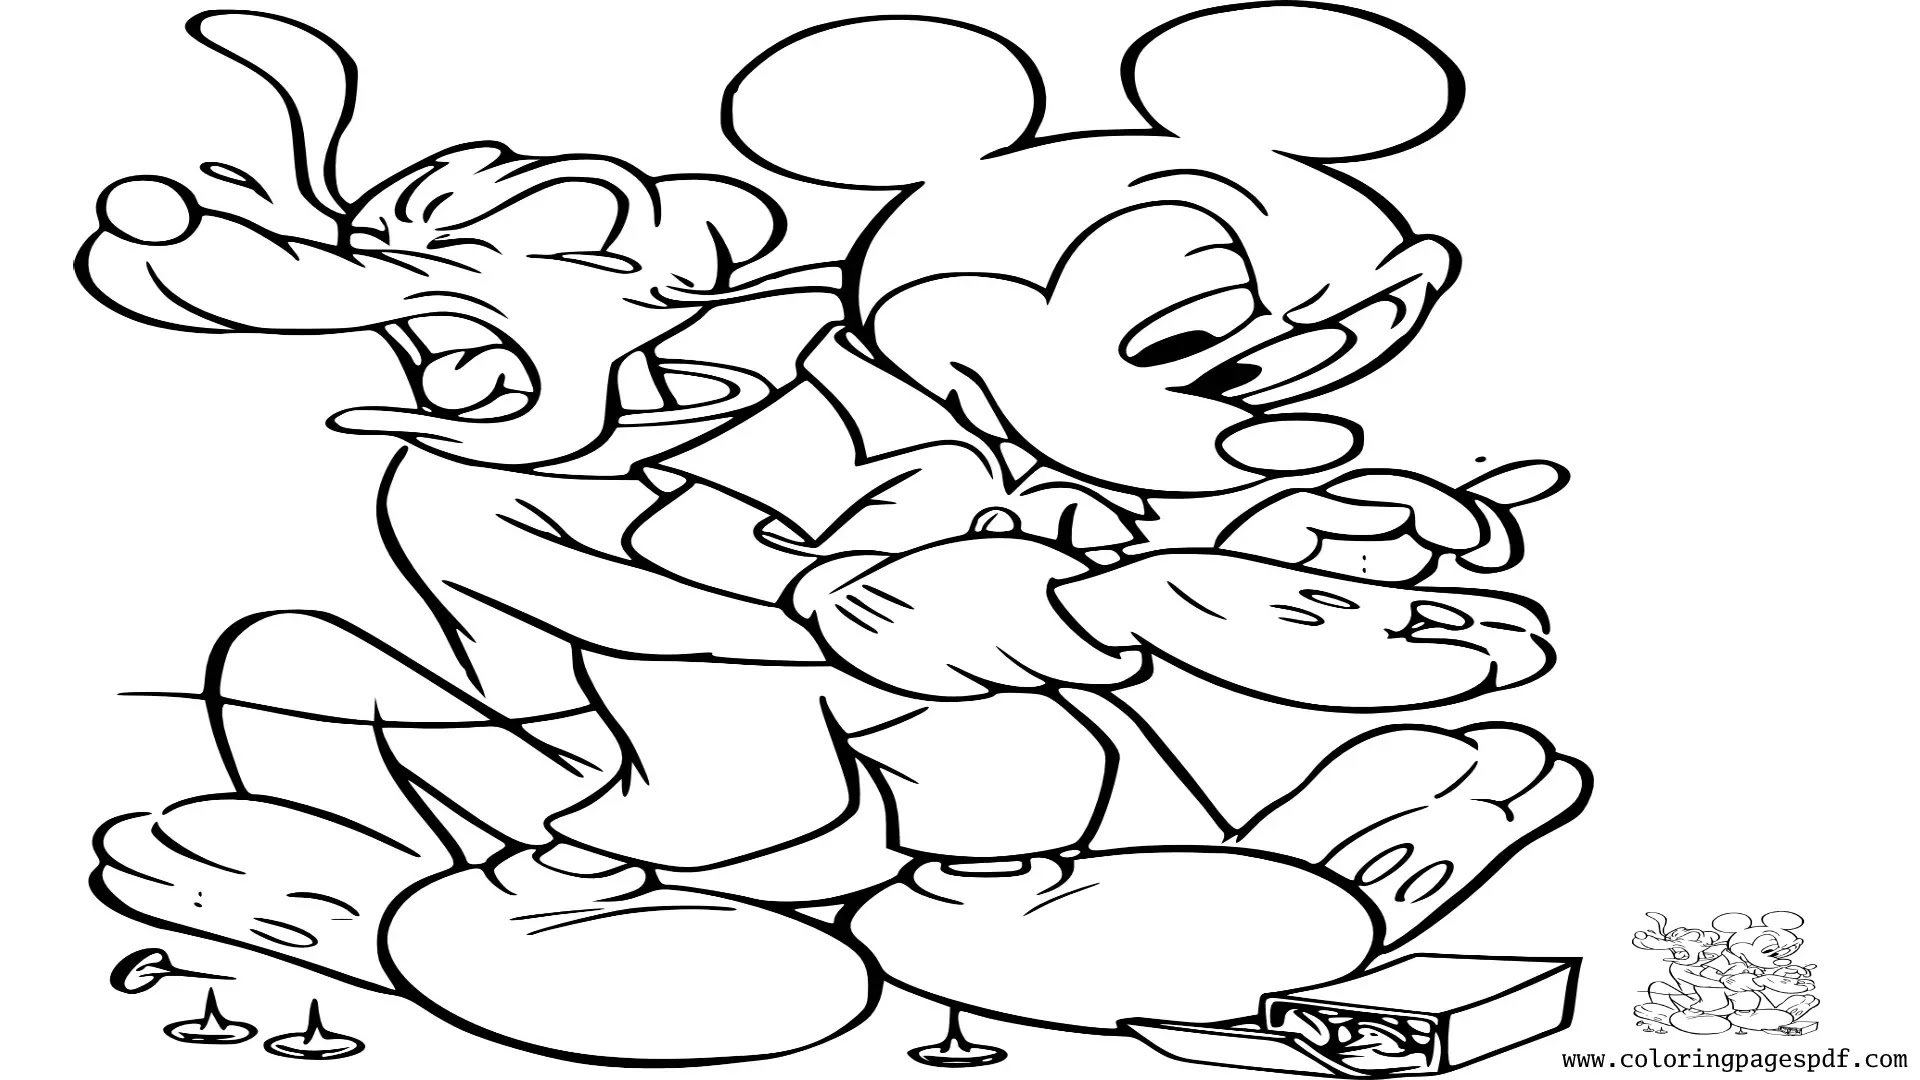 Coloring Page Of Mickey Mouse Removing A Nail From Pluto's Paw